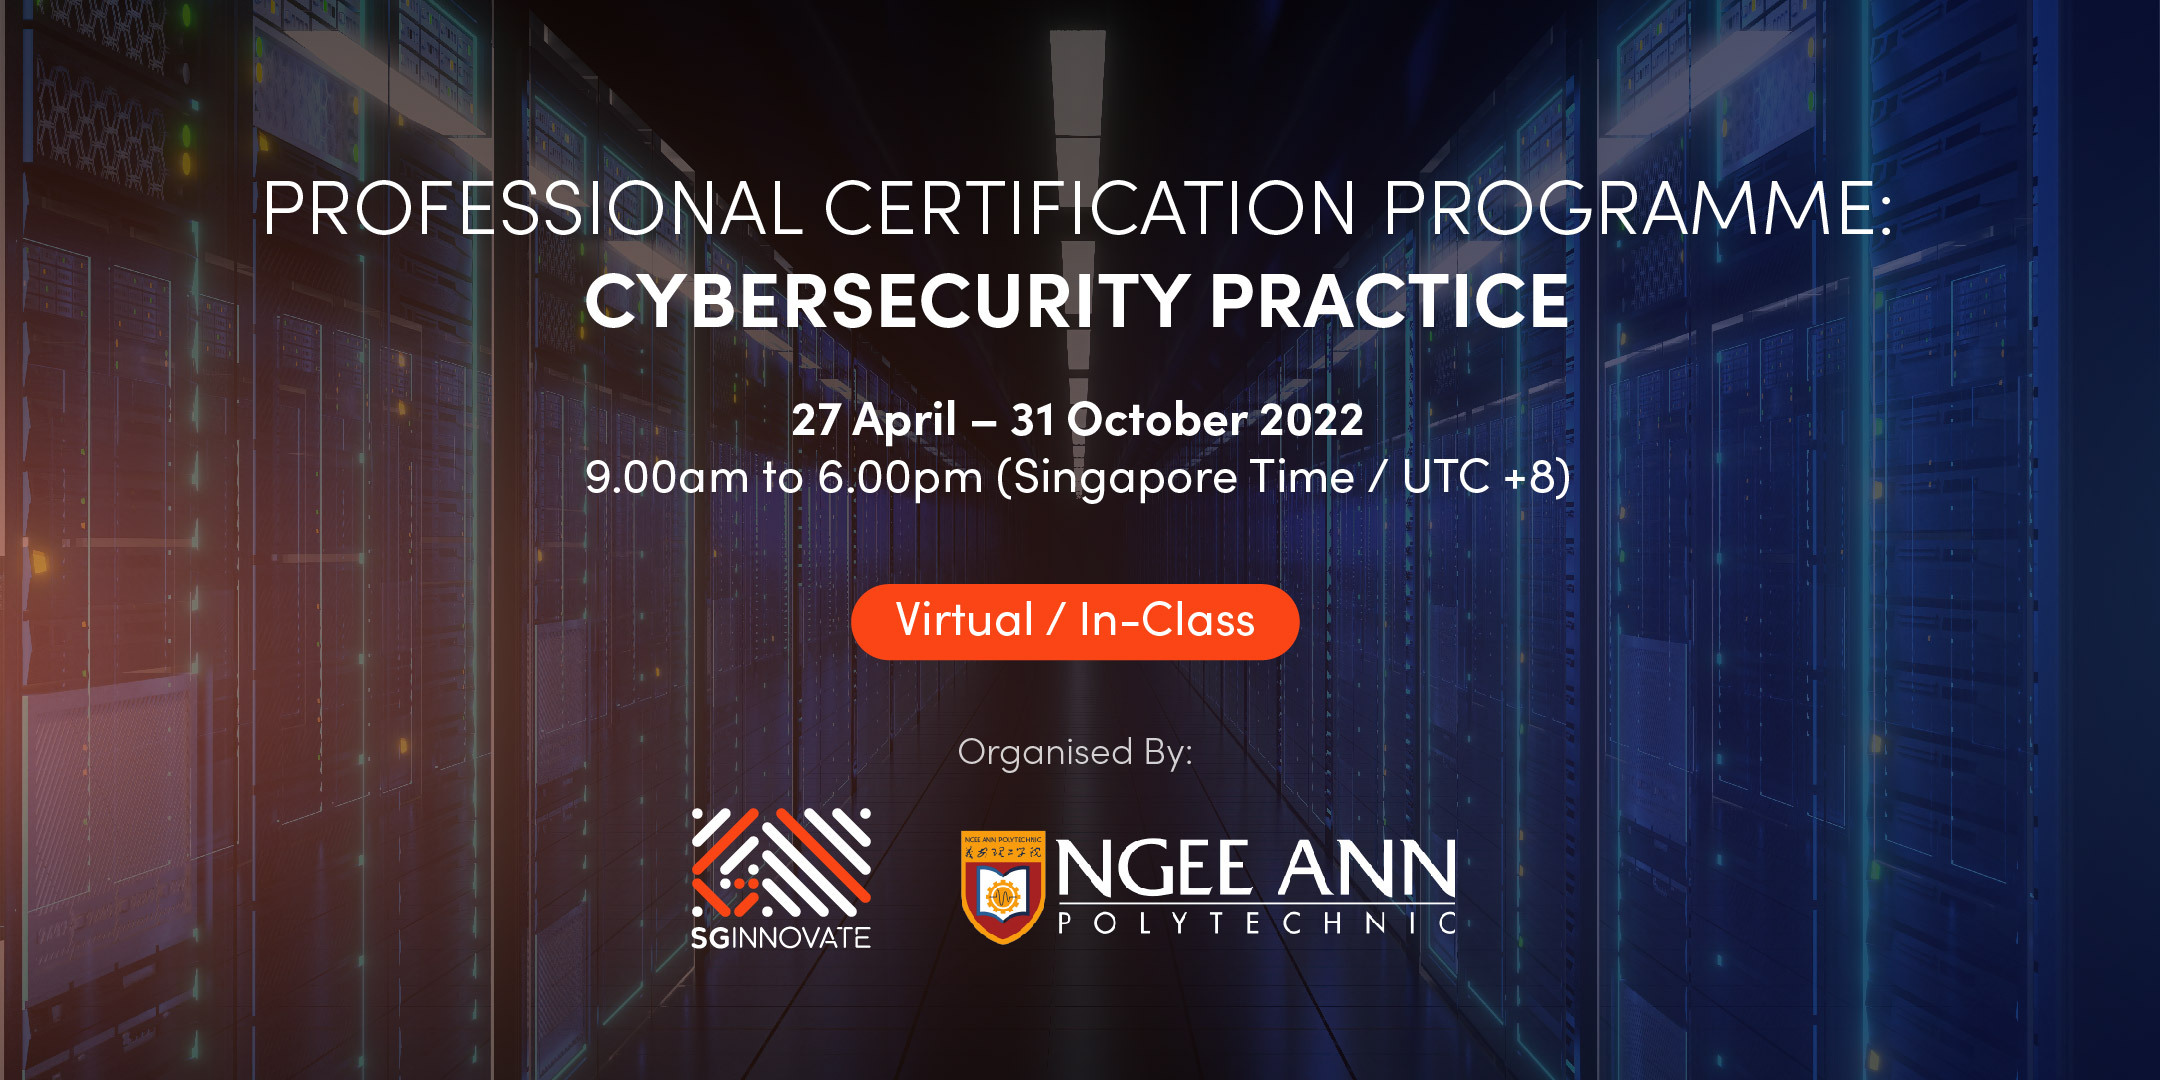 Professional Certification Programme: Cybersecurity Practice